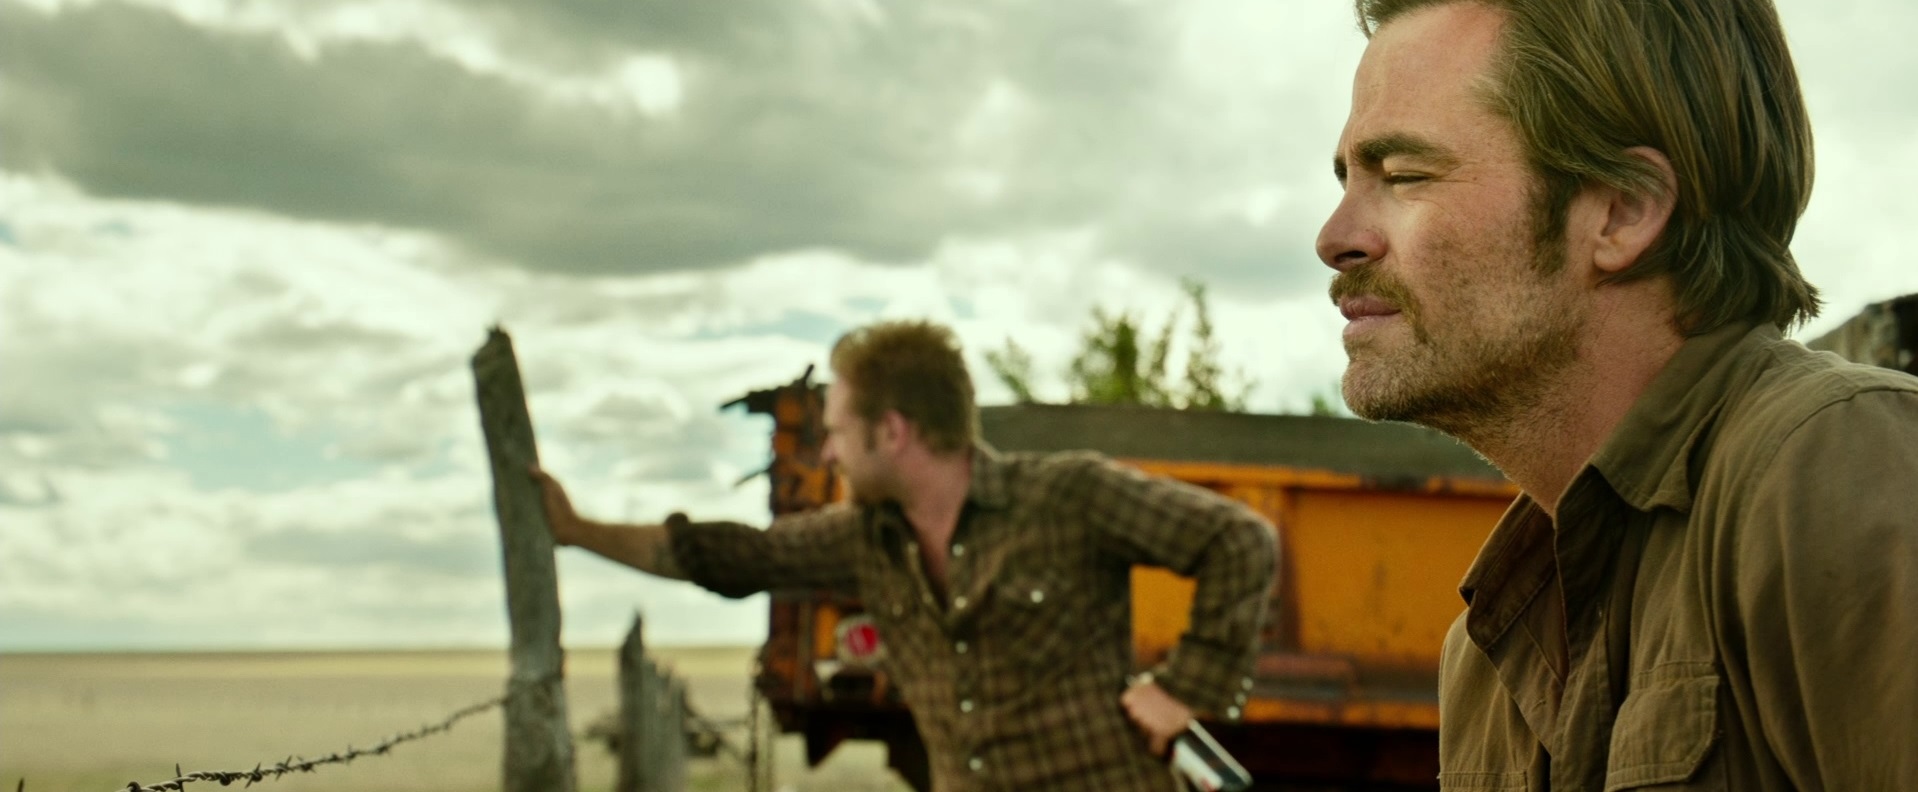 Chris Pine looks pensive as Ben Foster leans against something and looks out into the horizon in Hell or High Water.